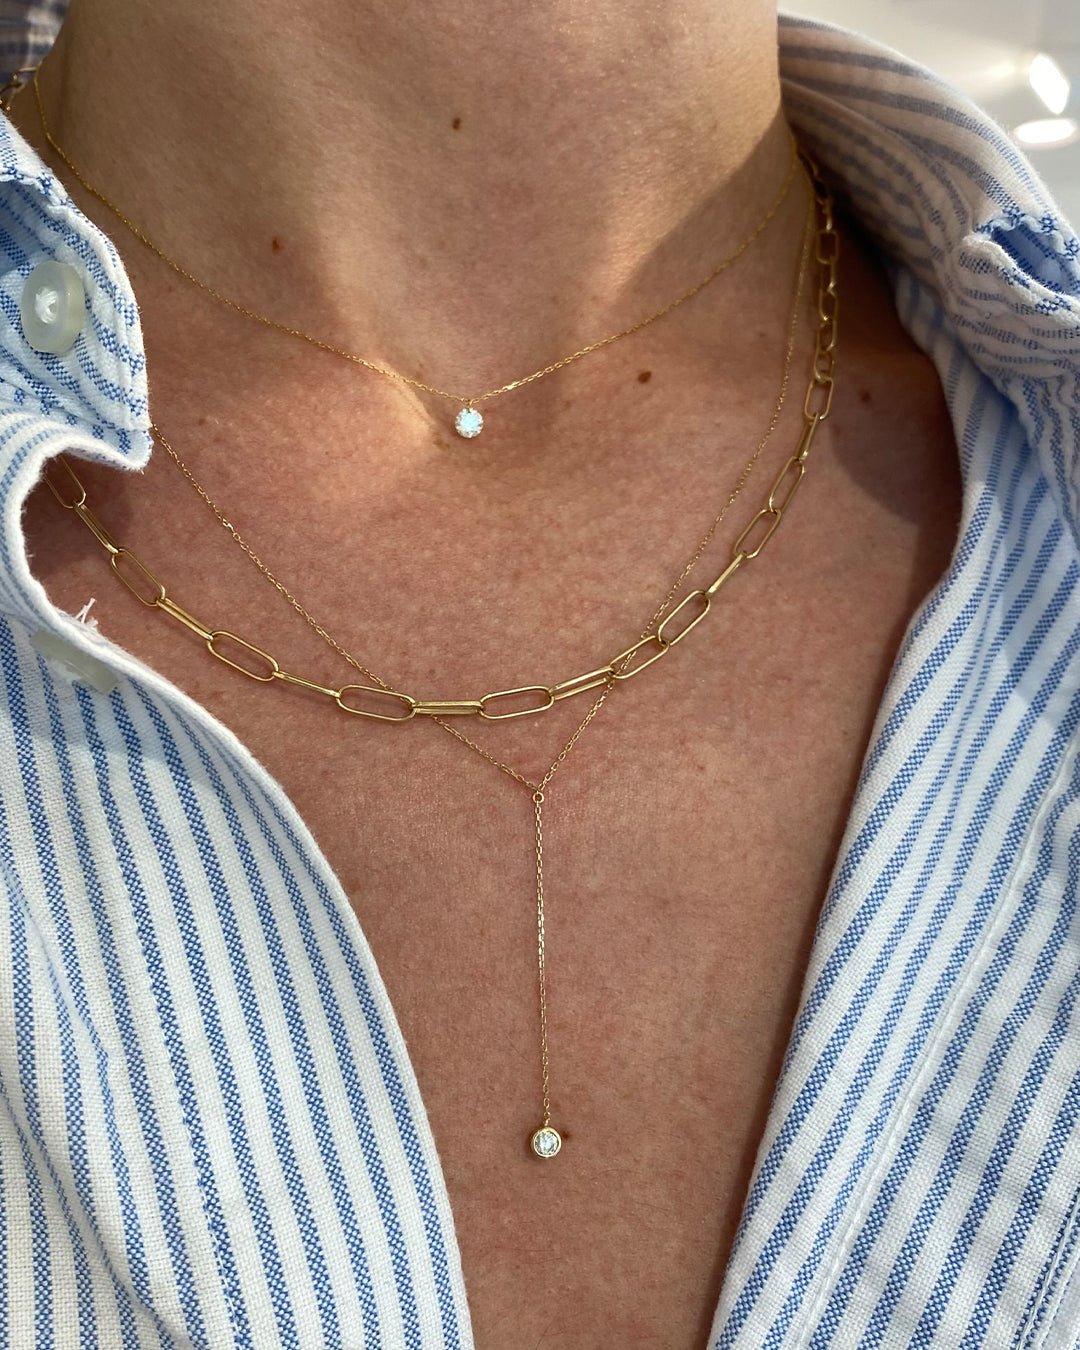 Woman wearing 14k gold and diamond necklaces